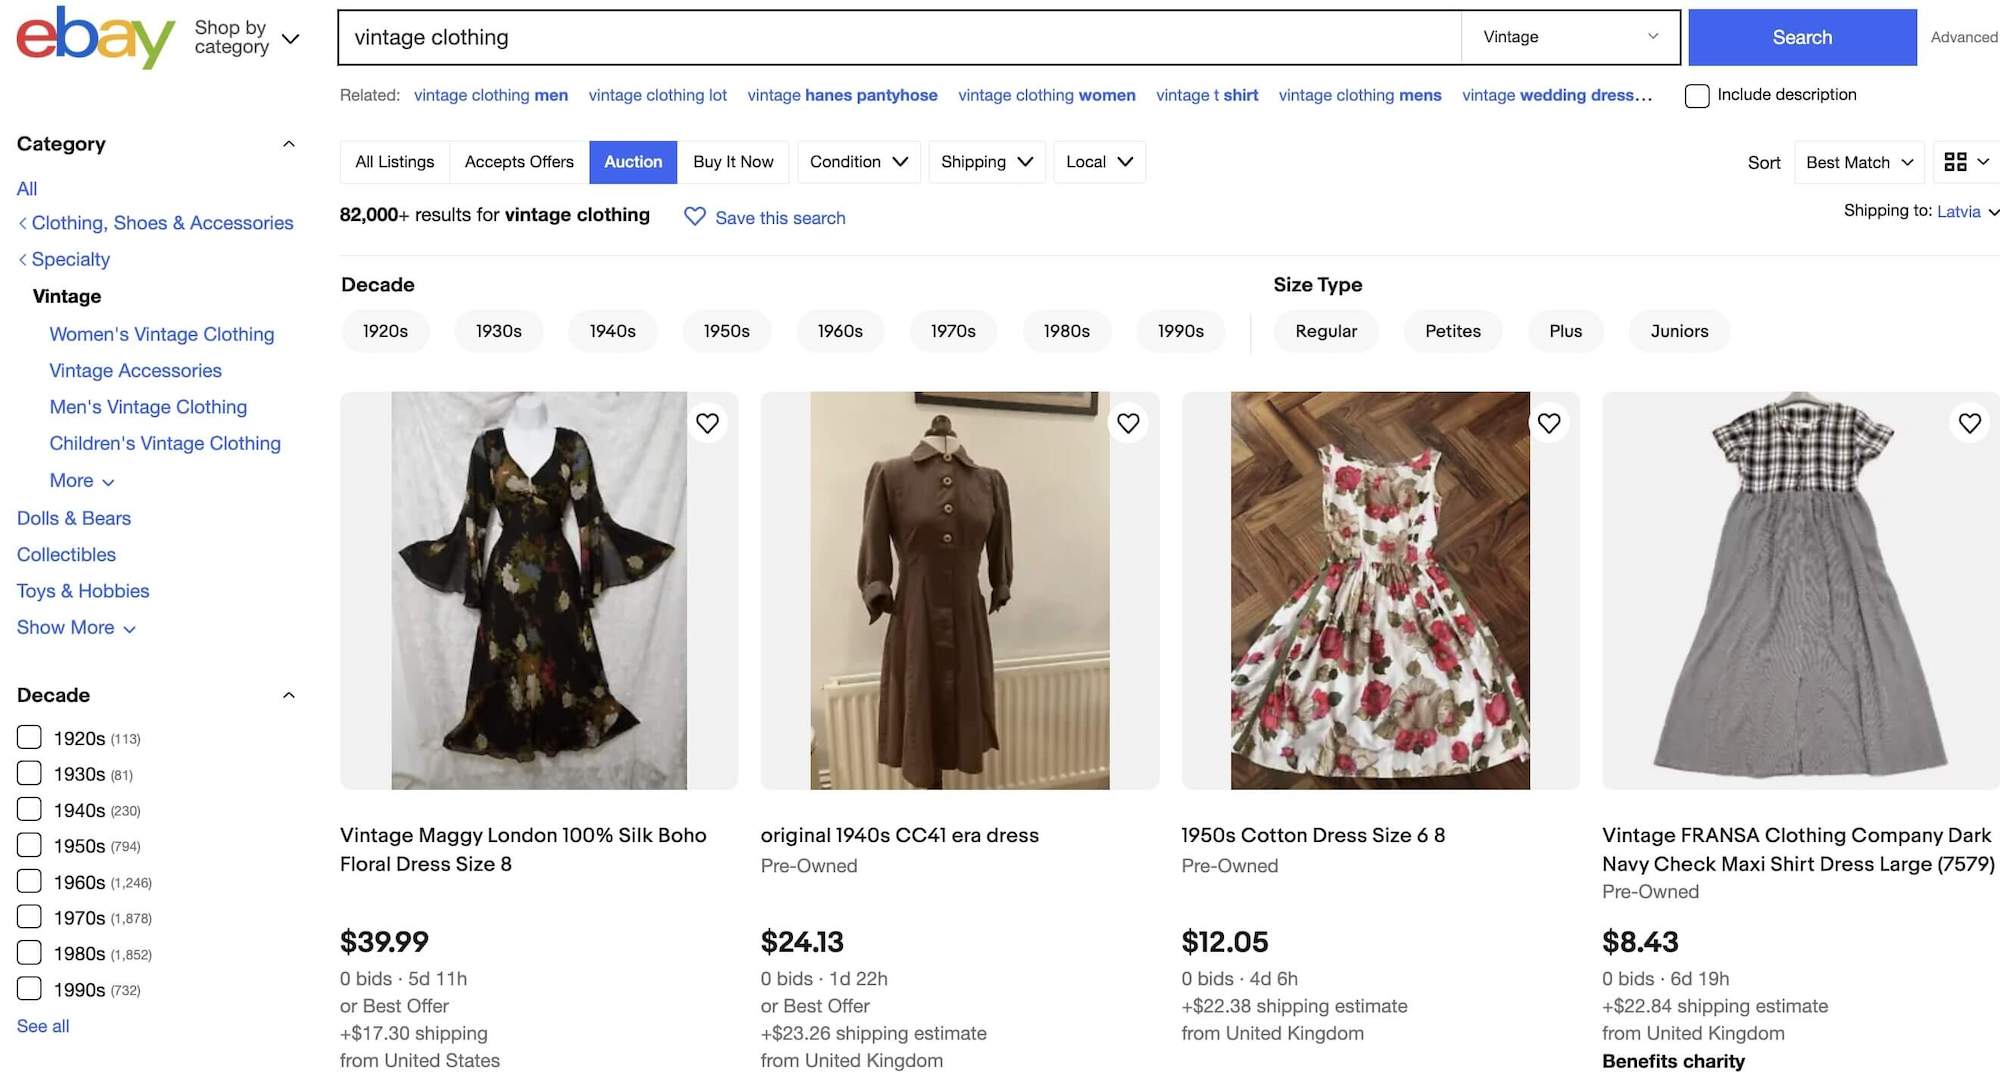 eBay search results for vintage clothing